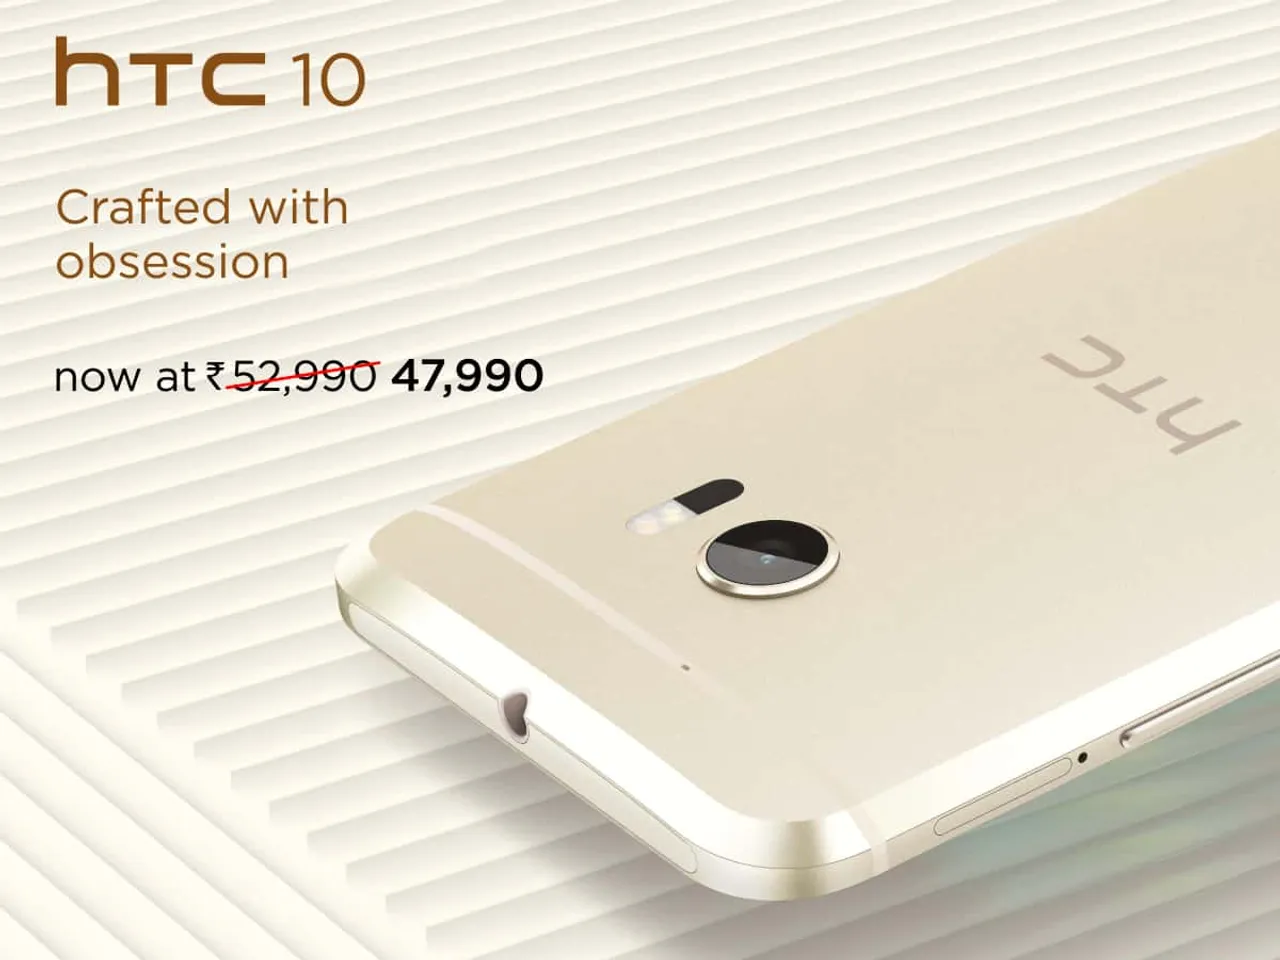 HTC 10 now available at a discounted price of Rs. 47,990